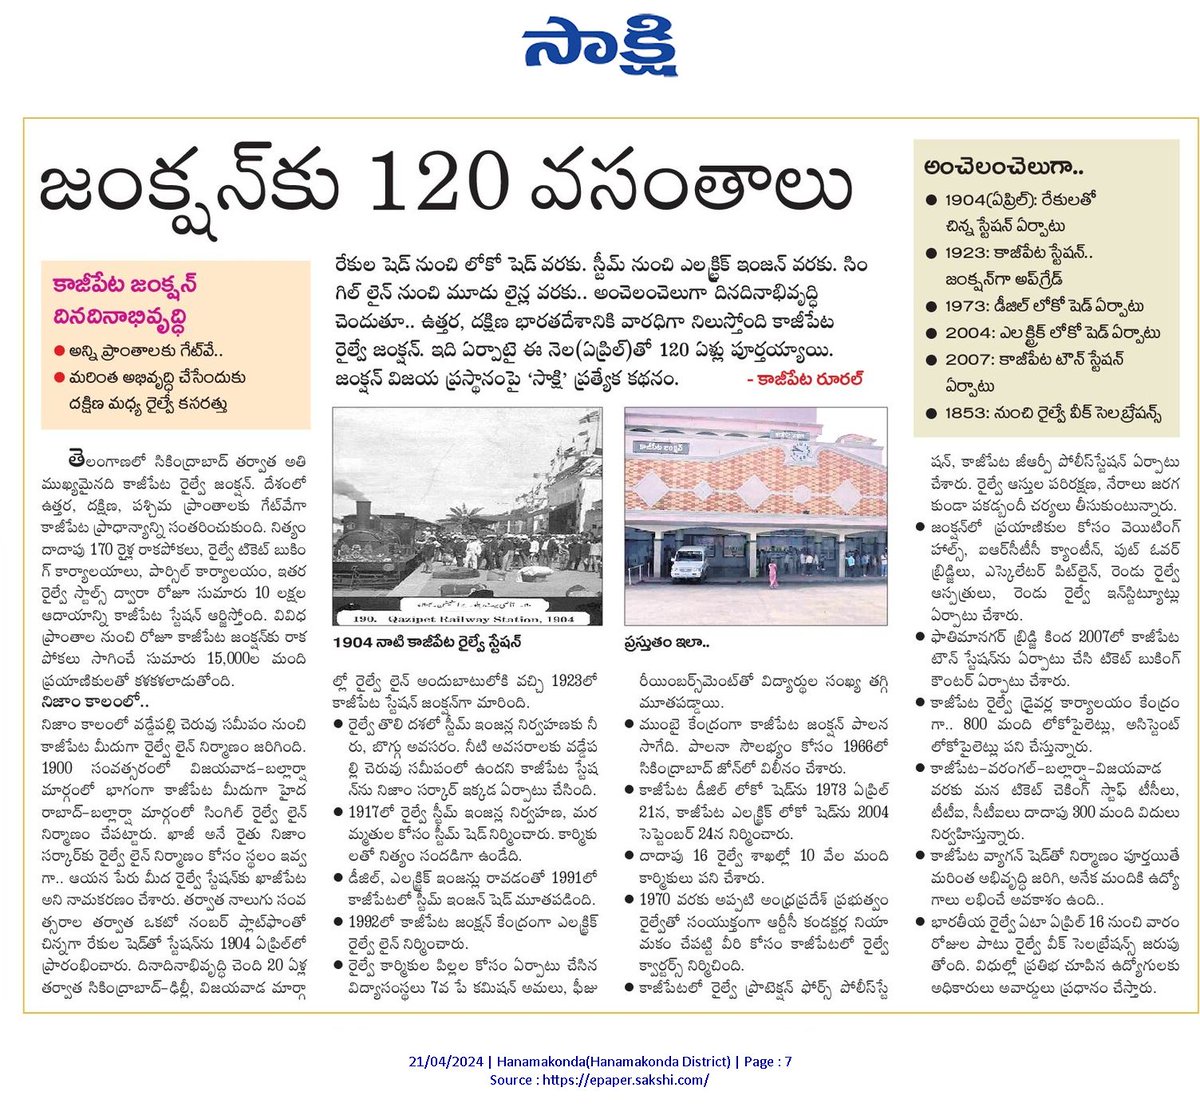 Kazipet Junction @120 Years ( It turned in to 120 ) 

Three Routes divide from Kazipet Junction 

Kazipet to Peddapalli ( New Delhi Route)
Kazipet to Dornakal ( Chennai Route )
Kazipet to Secunderabad ( Hyderabad Route)

First train ran was GT ( Grand Trunk) SF Express in 1929